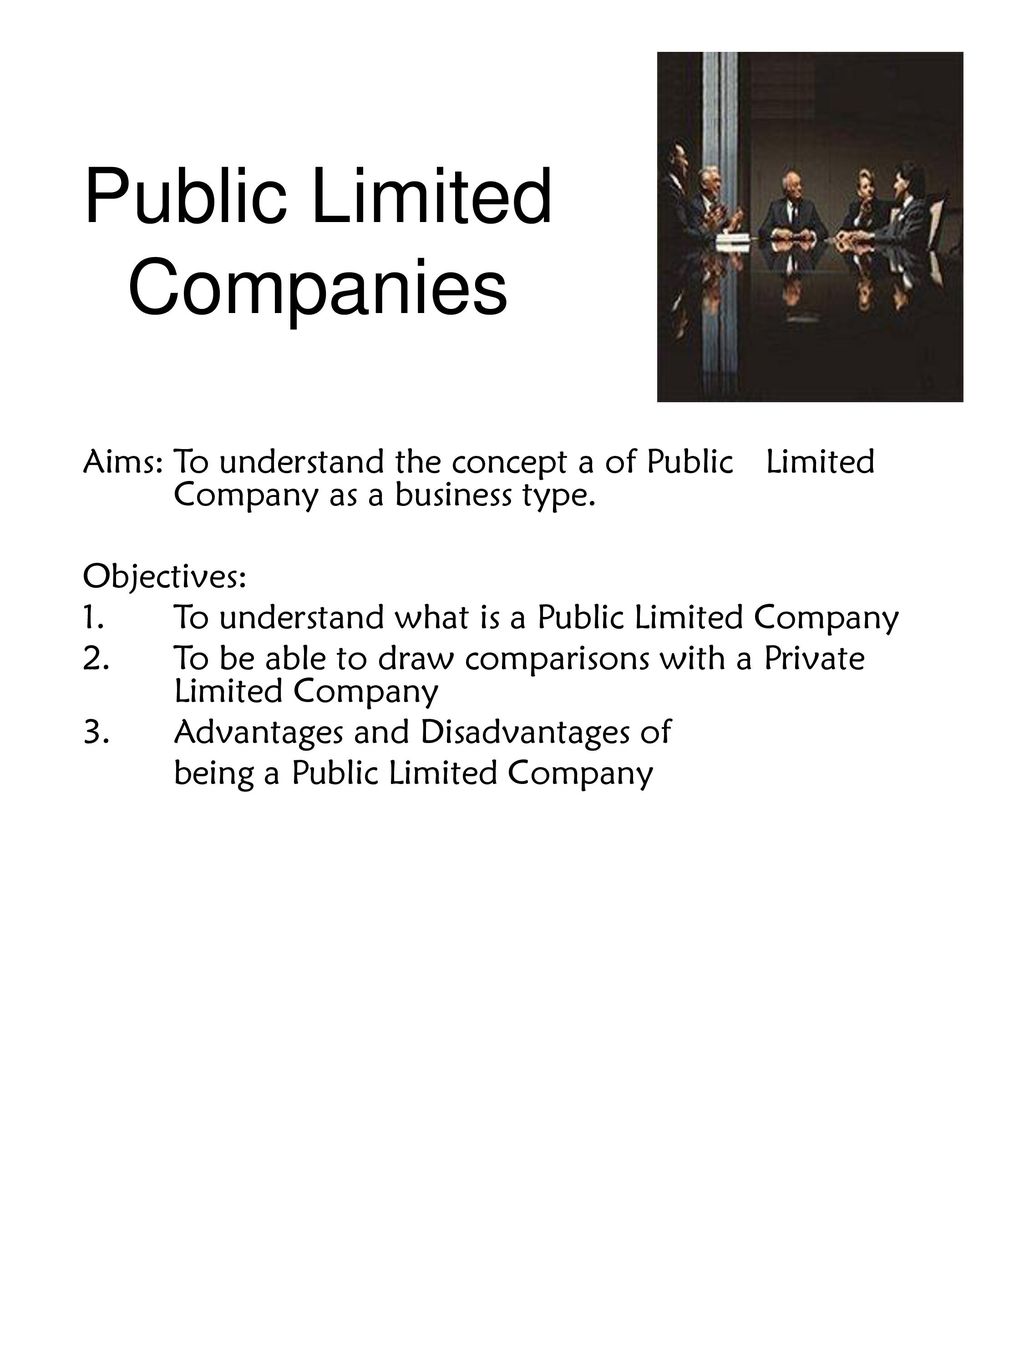 Public Limited Companies Ppt Download